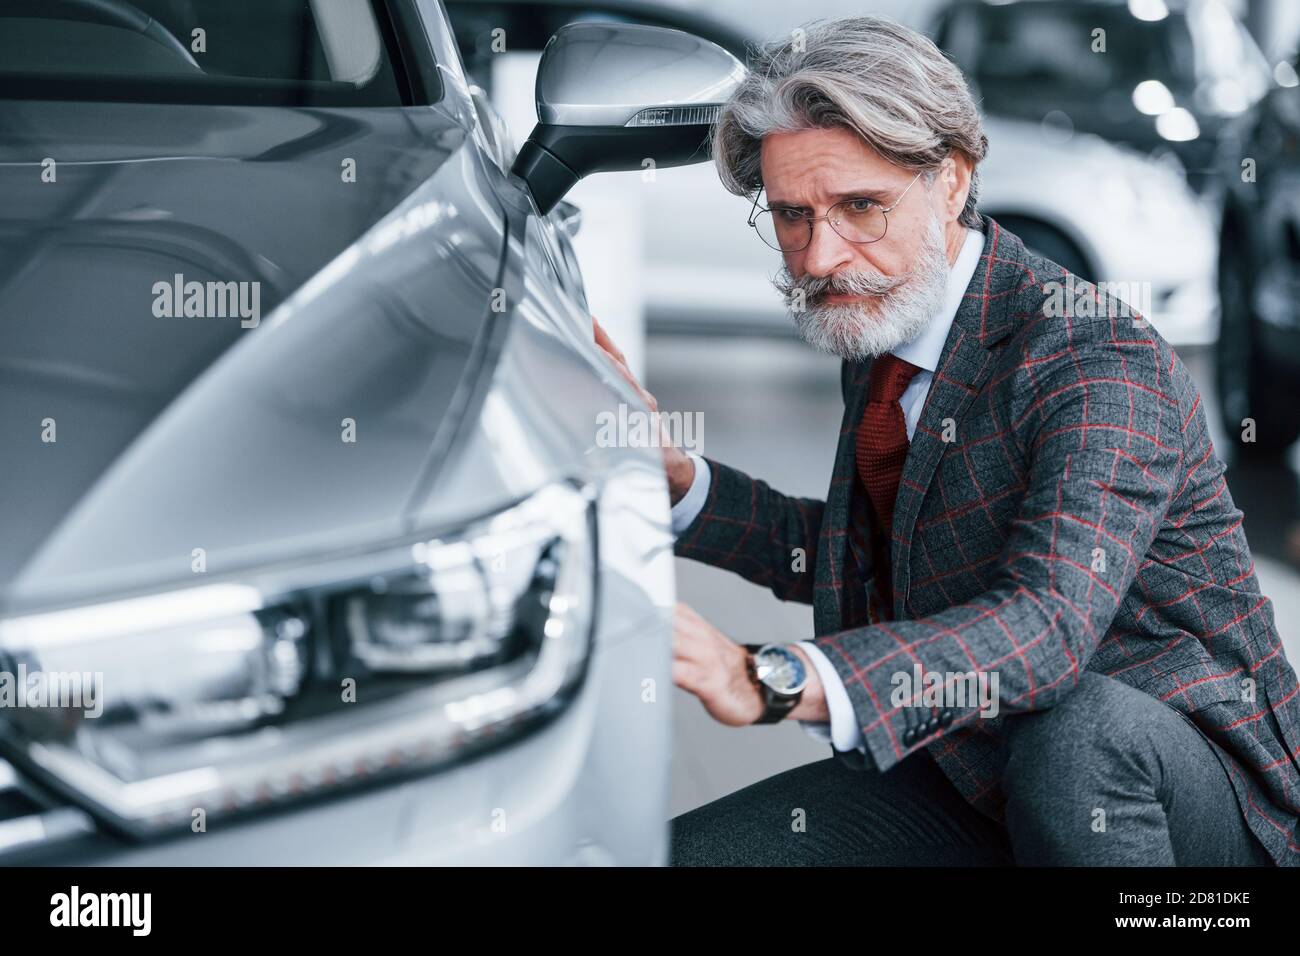 Fashionable old man with grey hair and mustache touching new car indoors in salon Stock Photo